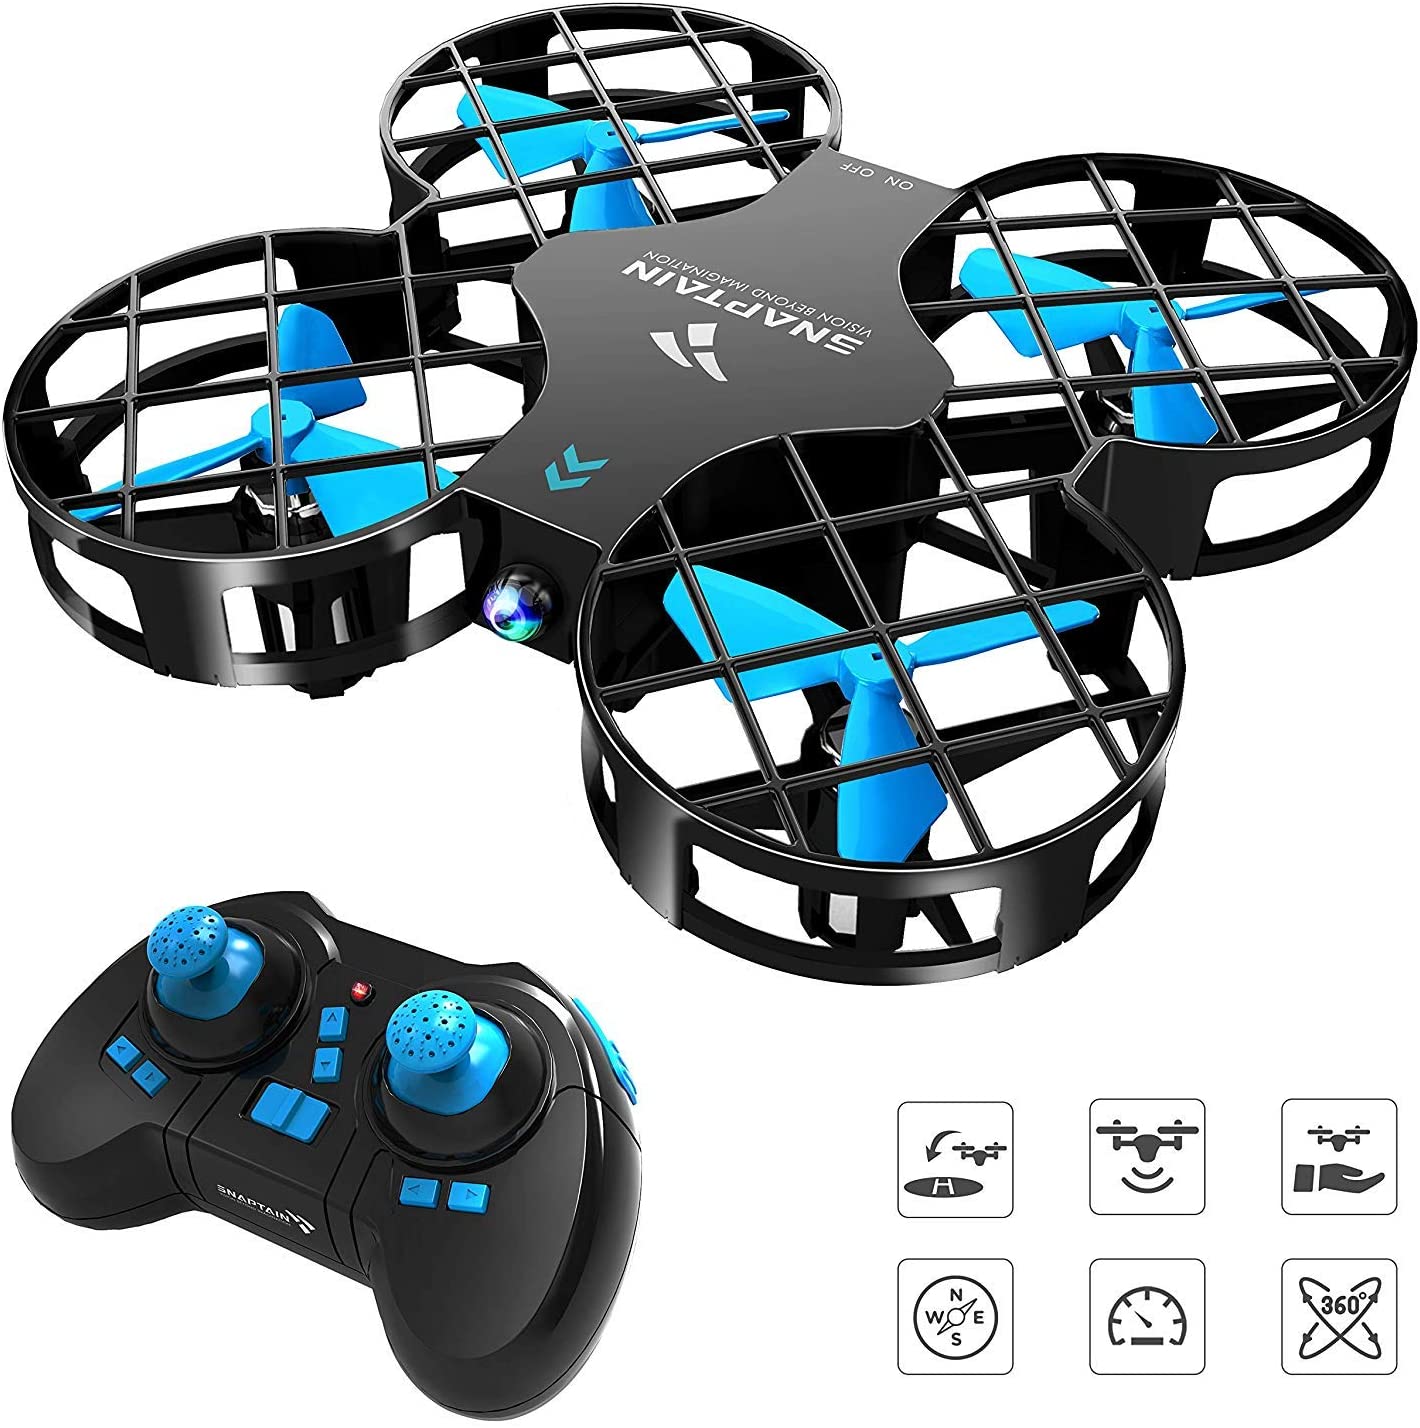 Snaptain H823H Mini Drone for Kids, Radio Control Quadcopter for Beginners with Altitude Hold, Headless Mode, 3D Flips, One Key Return and Speed Adjustment - image 1 of 11